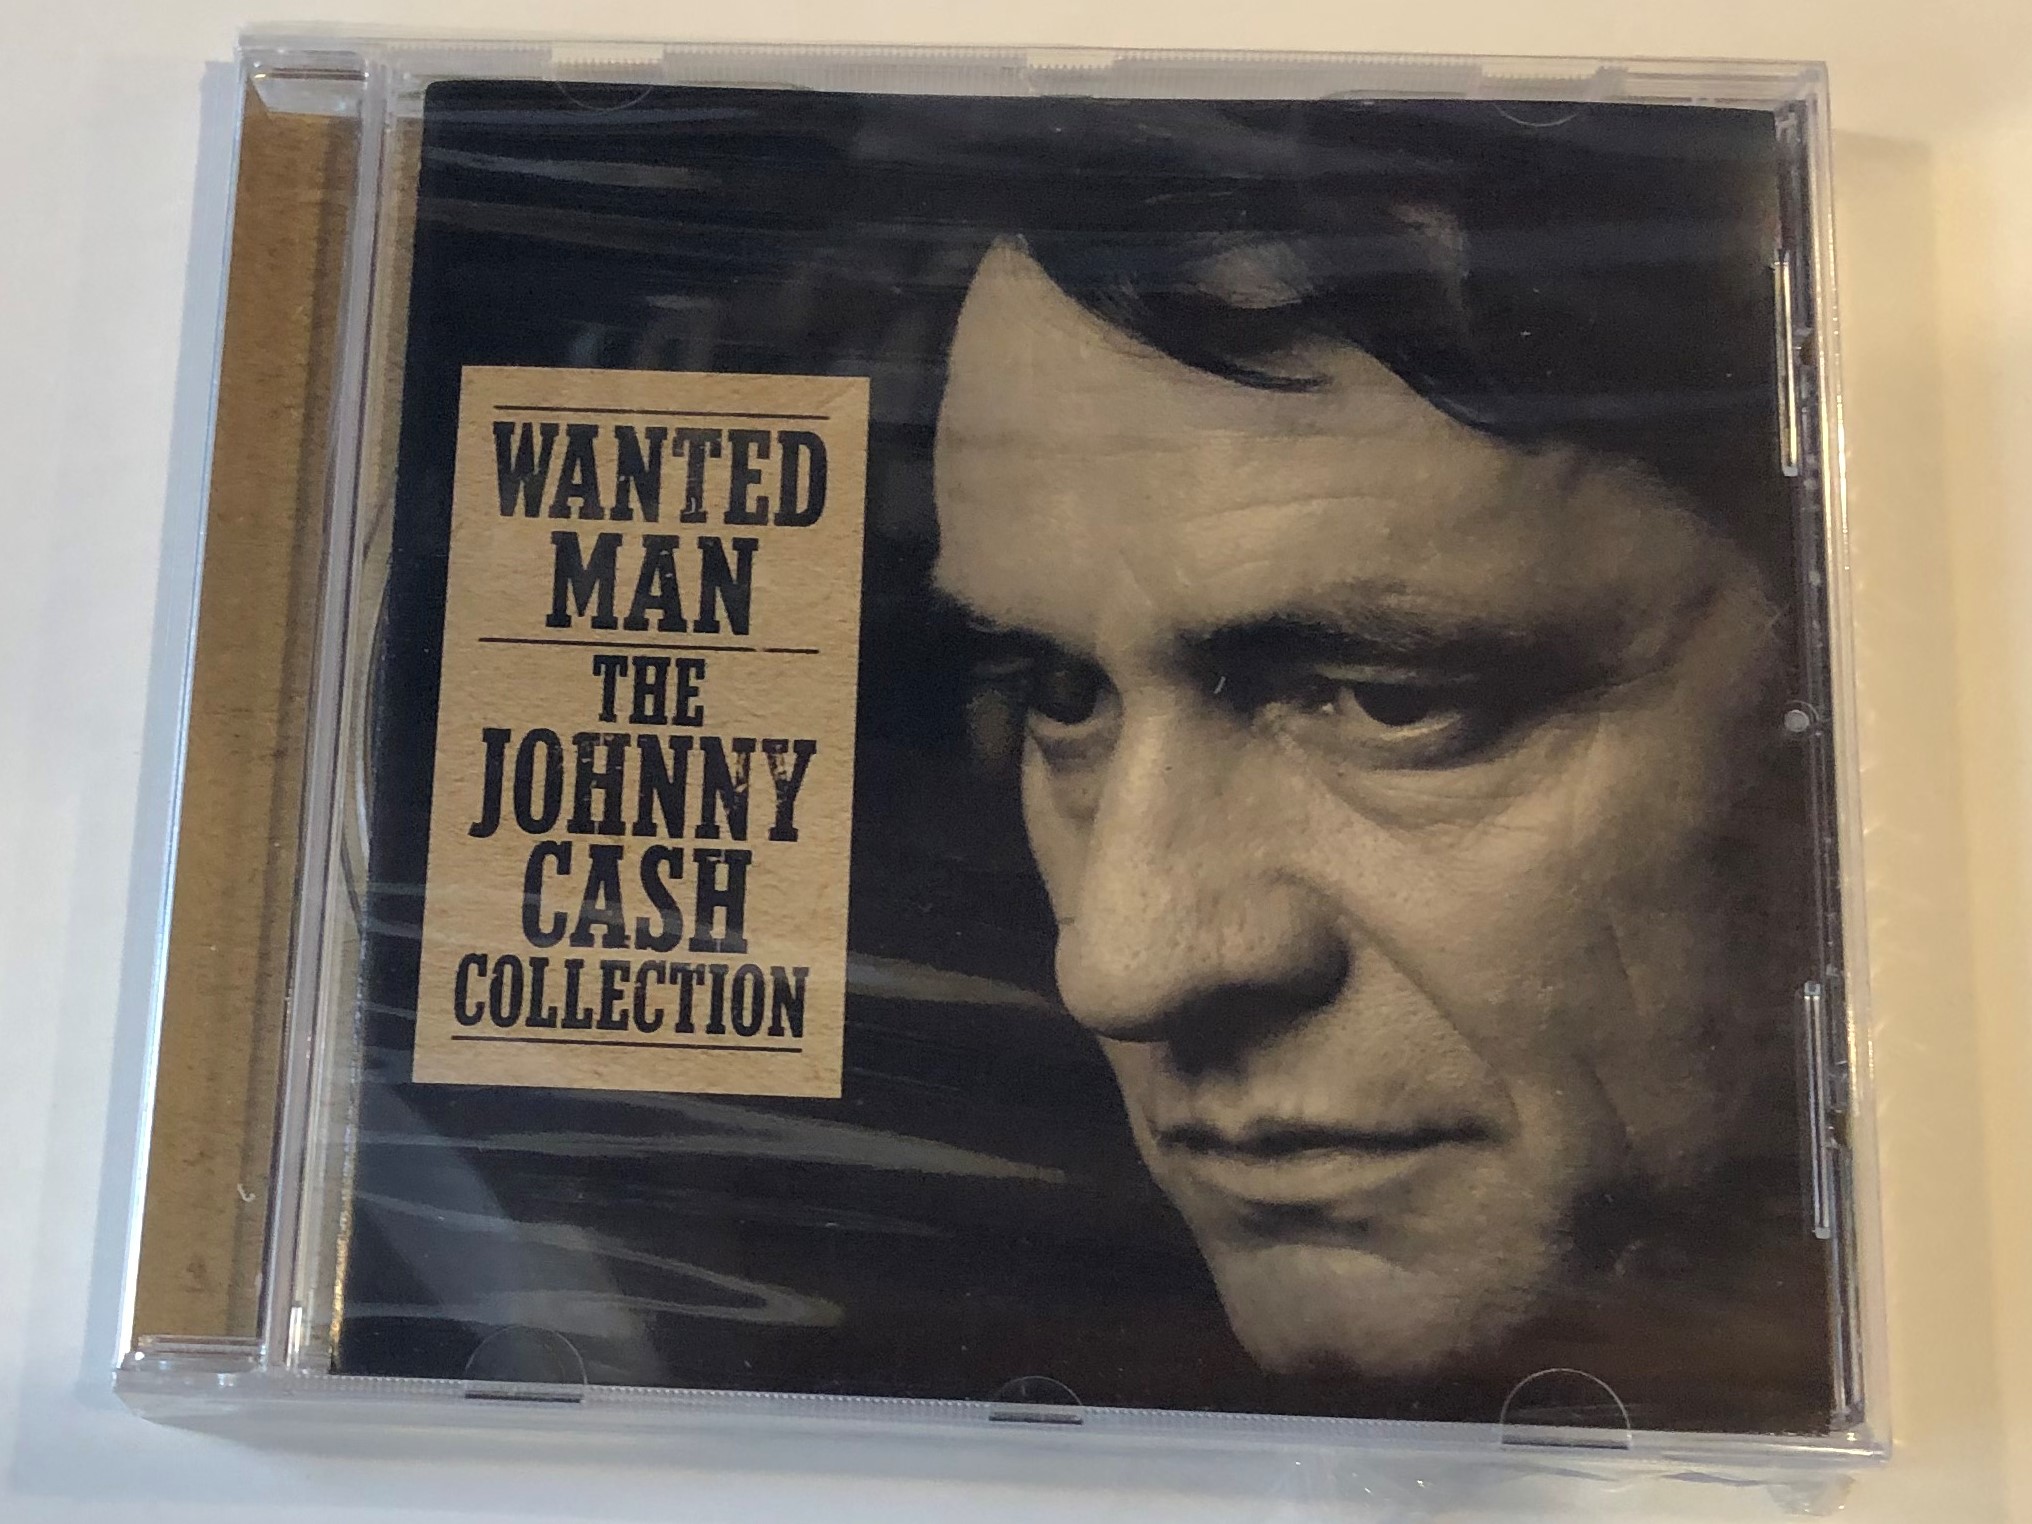 wanted-man-the-johnny-cash-collection-sony-bmg-music-entertainment-audio-cd-88697308082-1-.jpg